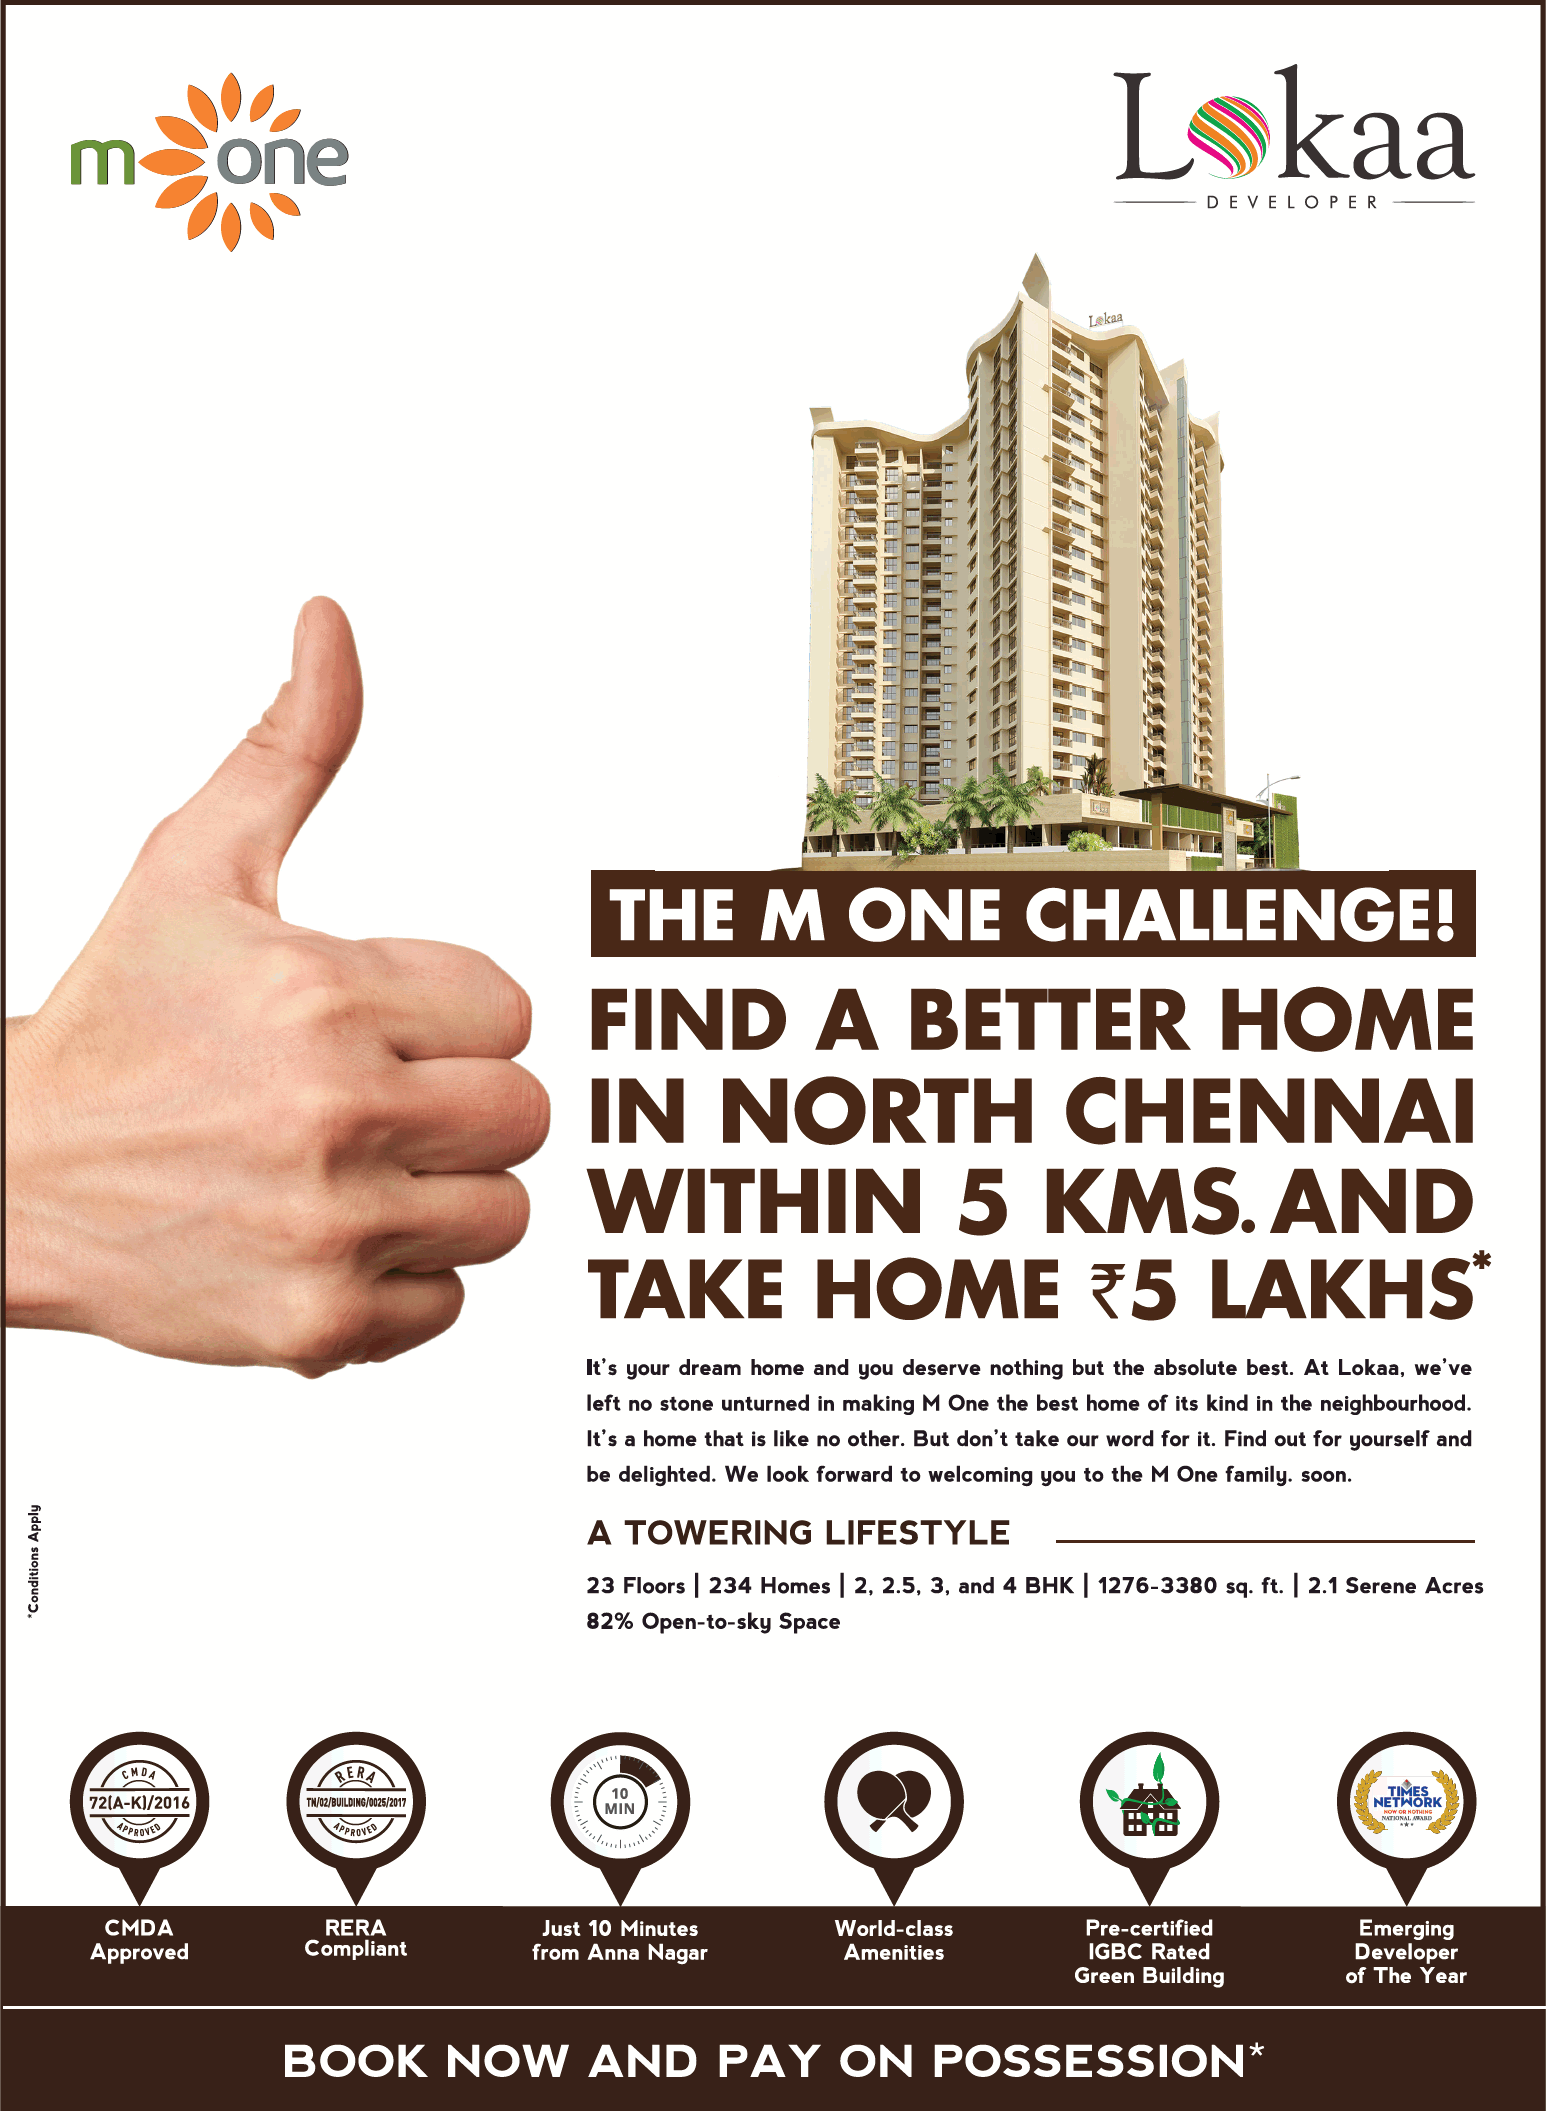 Book homes at Rs. 5 lakhs at Lokaa M One in Chennai